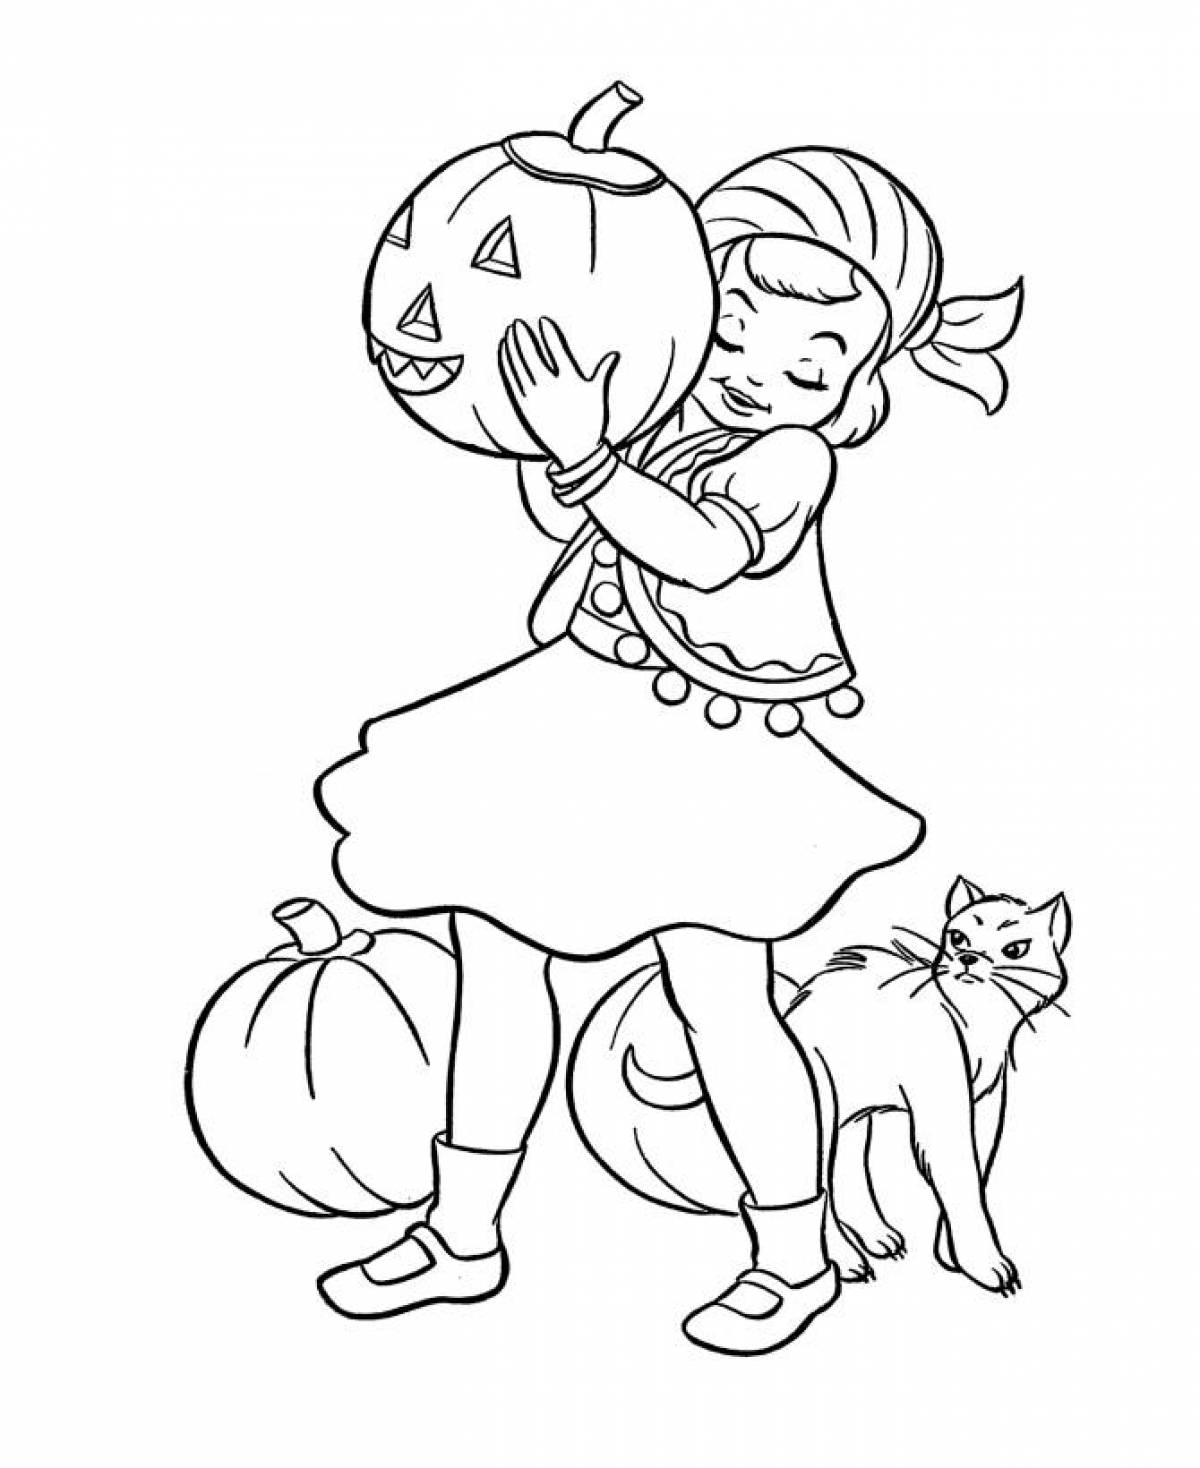 Halloween coloring pages printable